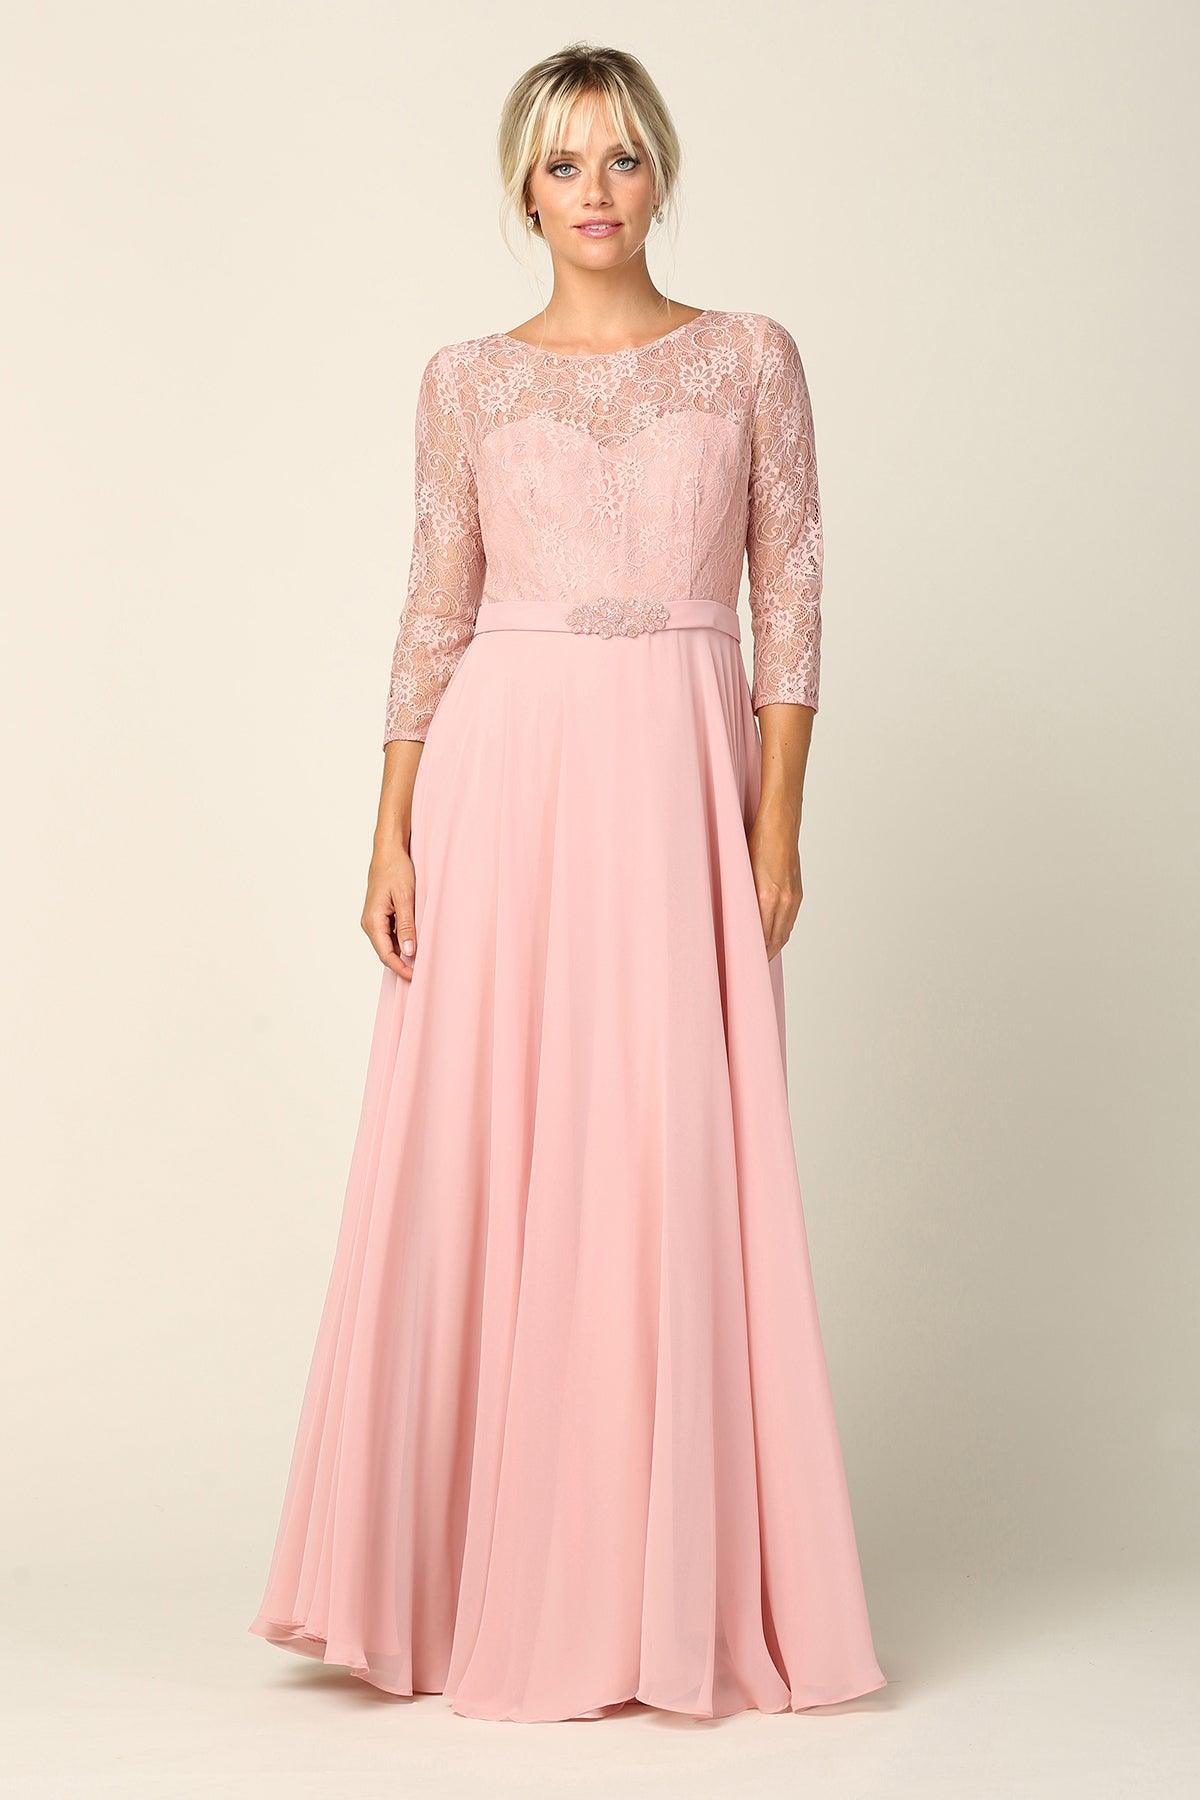 Mother of the Bride Long Formal Lace Chiffon Dress Sale - The Dress Outlet